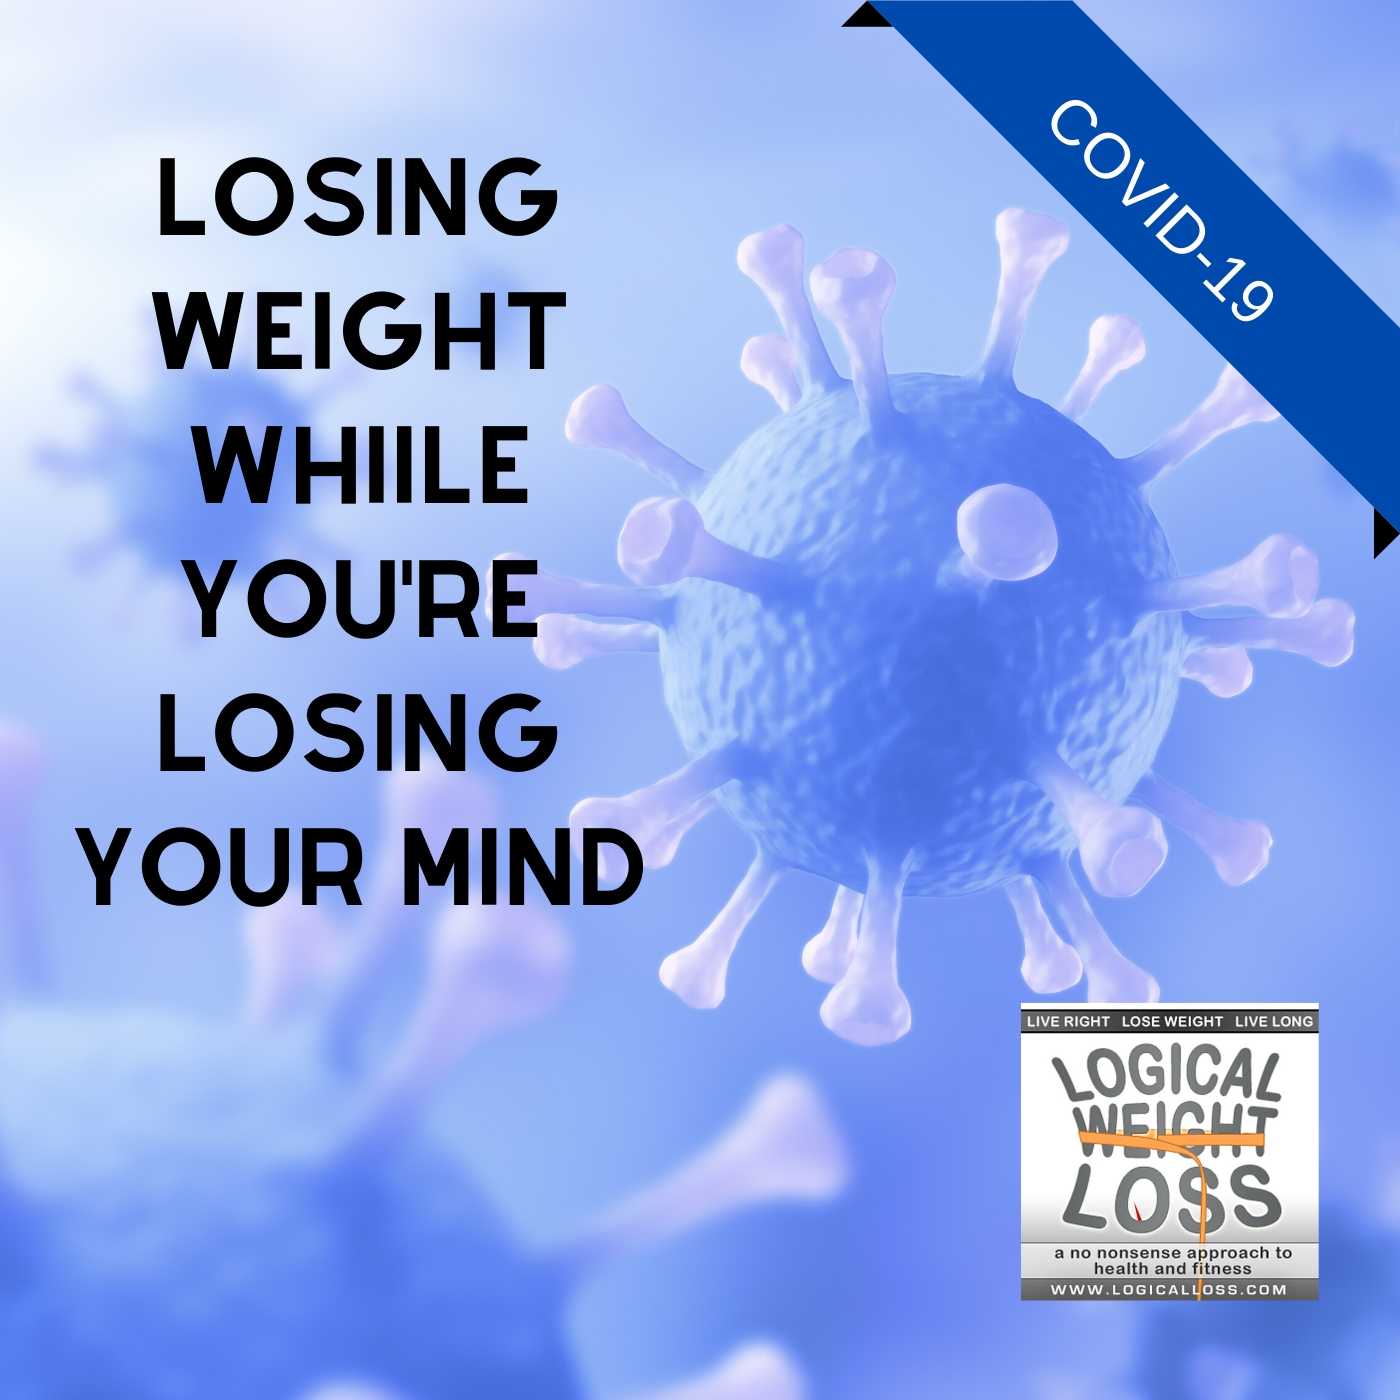 Losing Weight While You’re Losing Your Mind